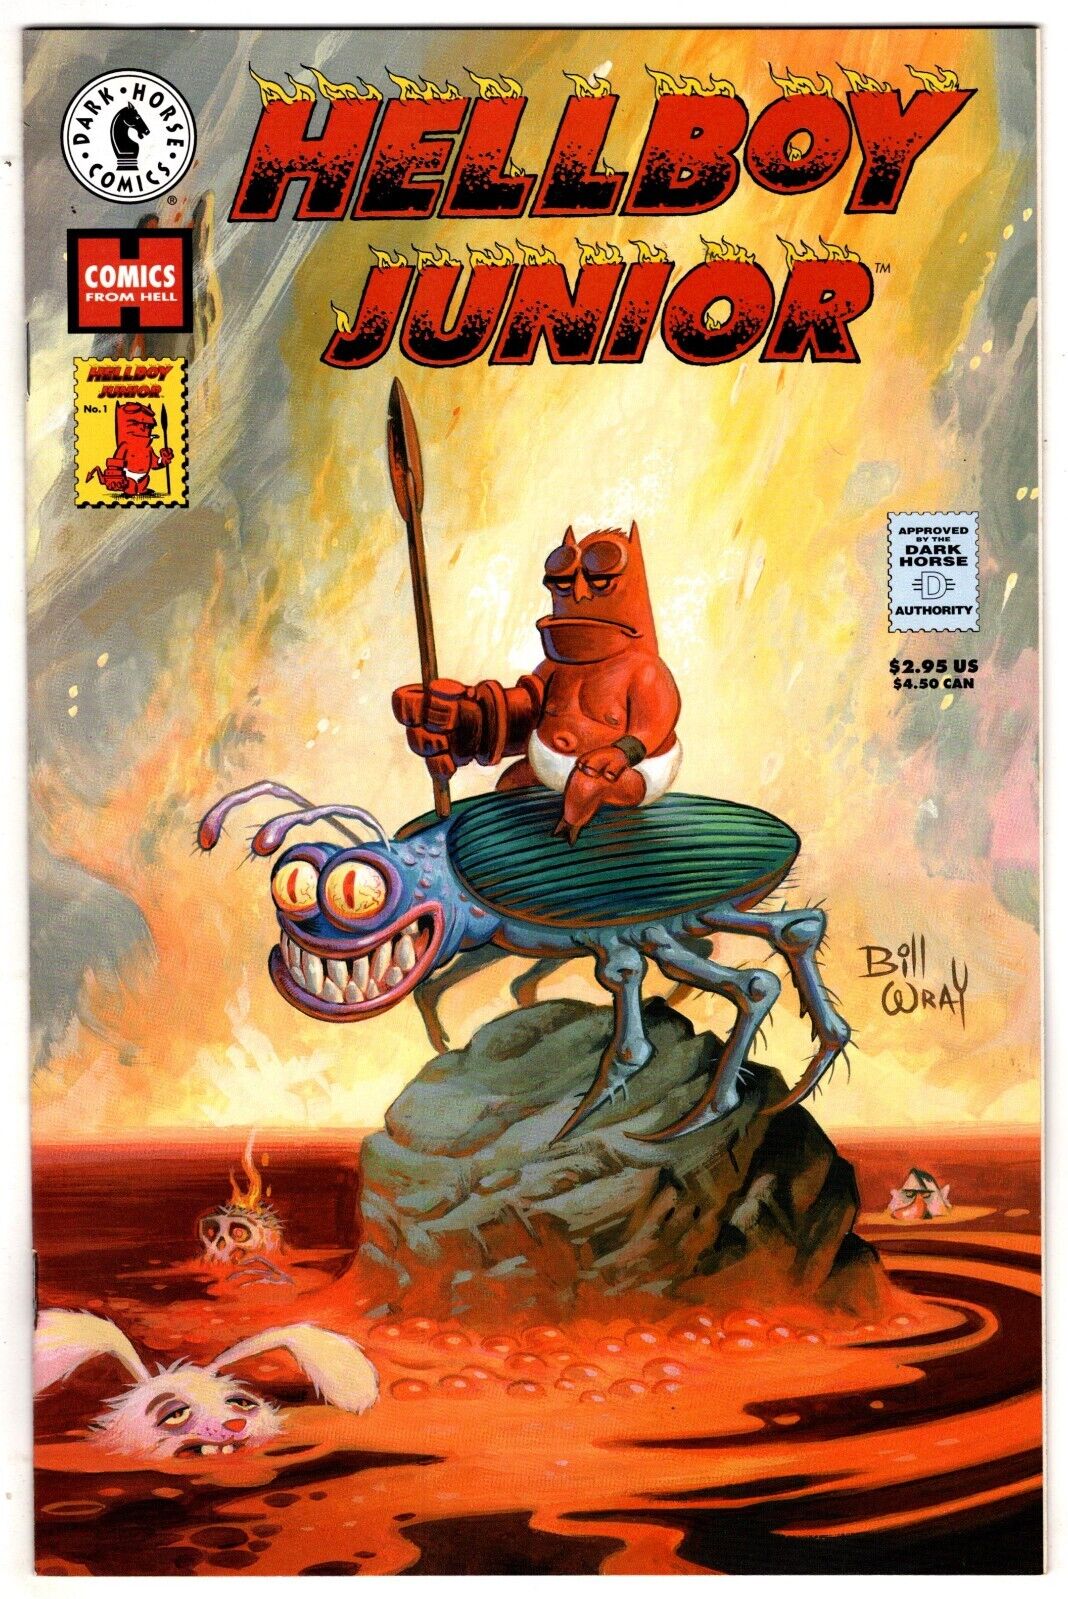 Hellboy Jr  #1  A dark and hilarious collection of stories